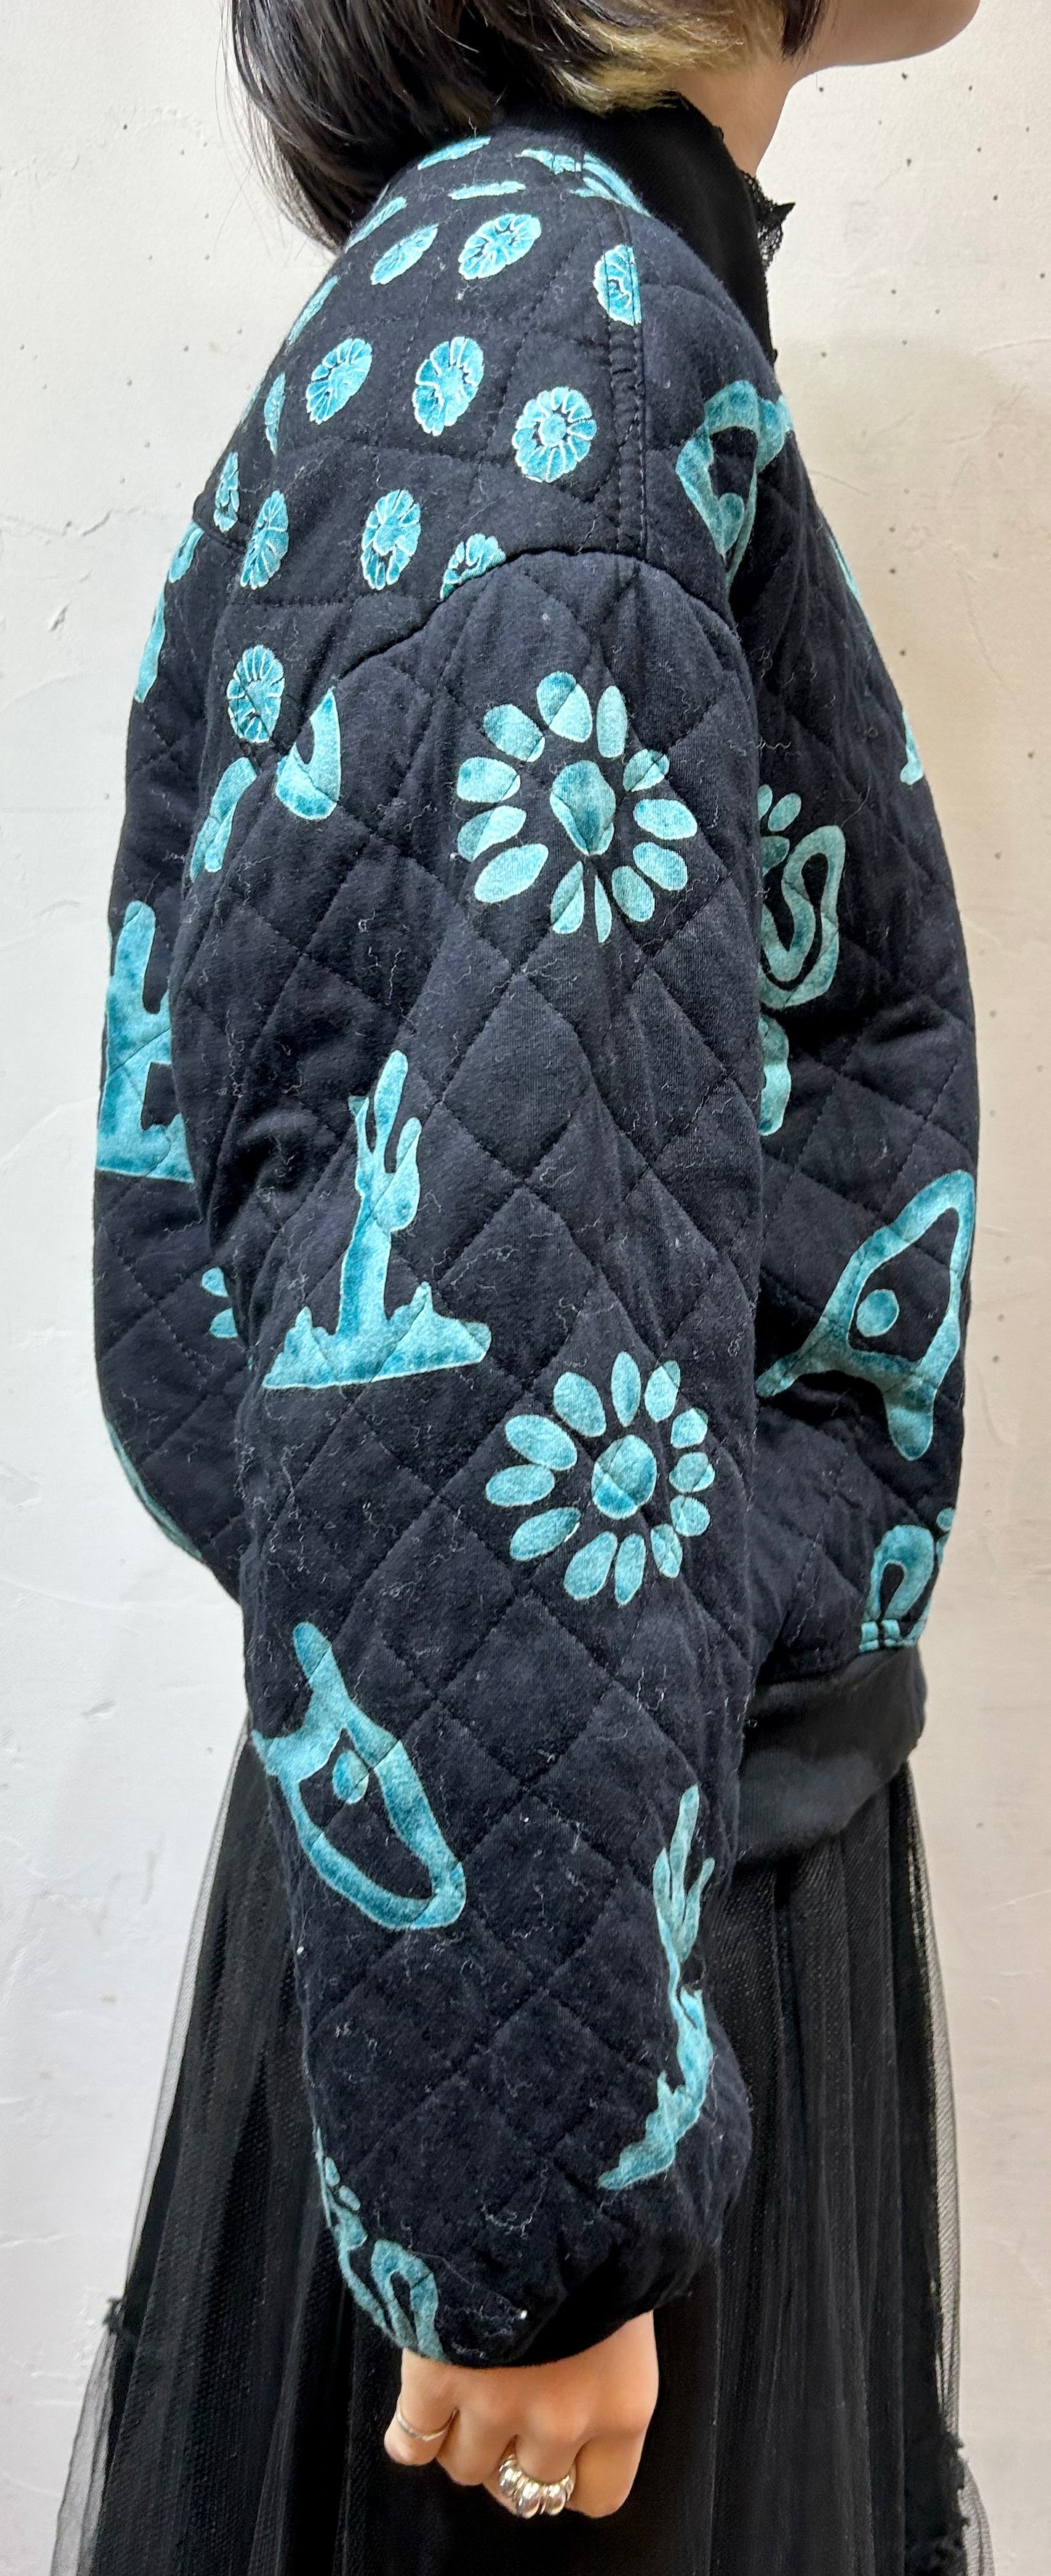 Vintage Quilting Jacket MADE IN USA [K25337]